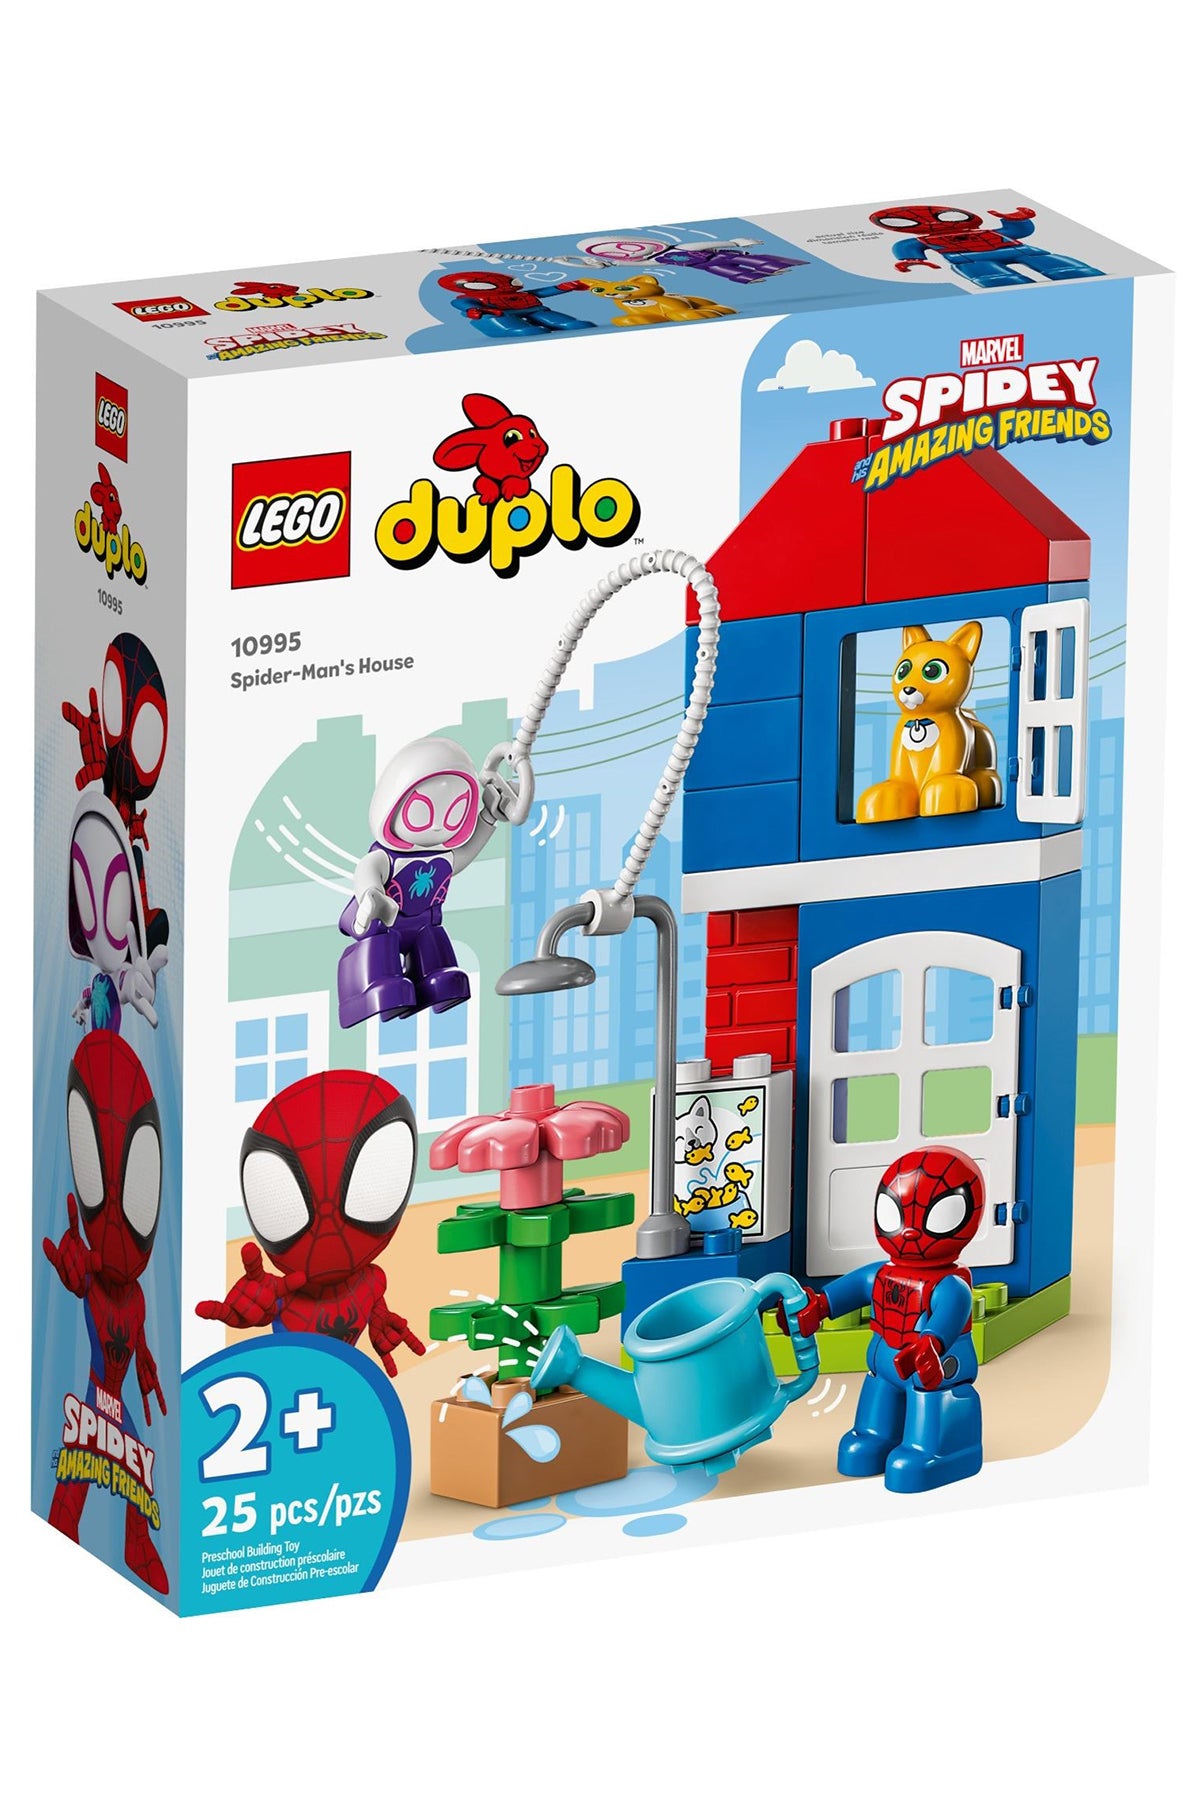 Lego Duplo : Spidey and His Amazing Friends Spider-Man's House